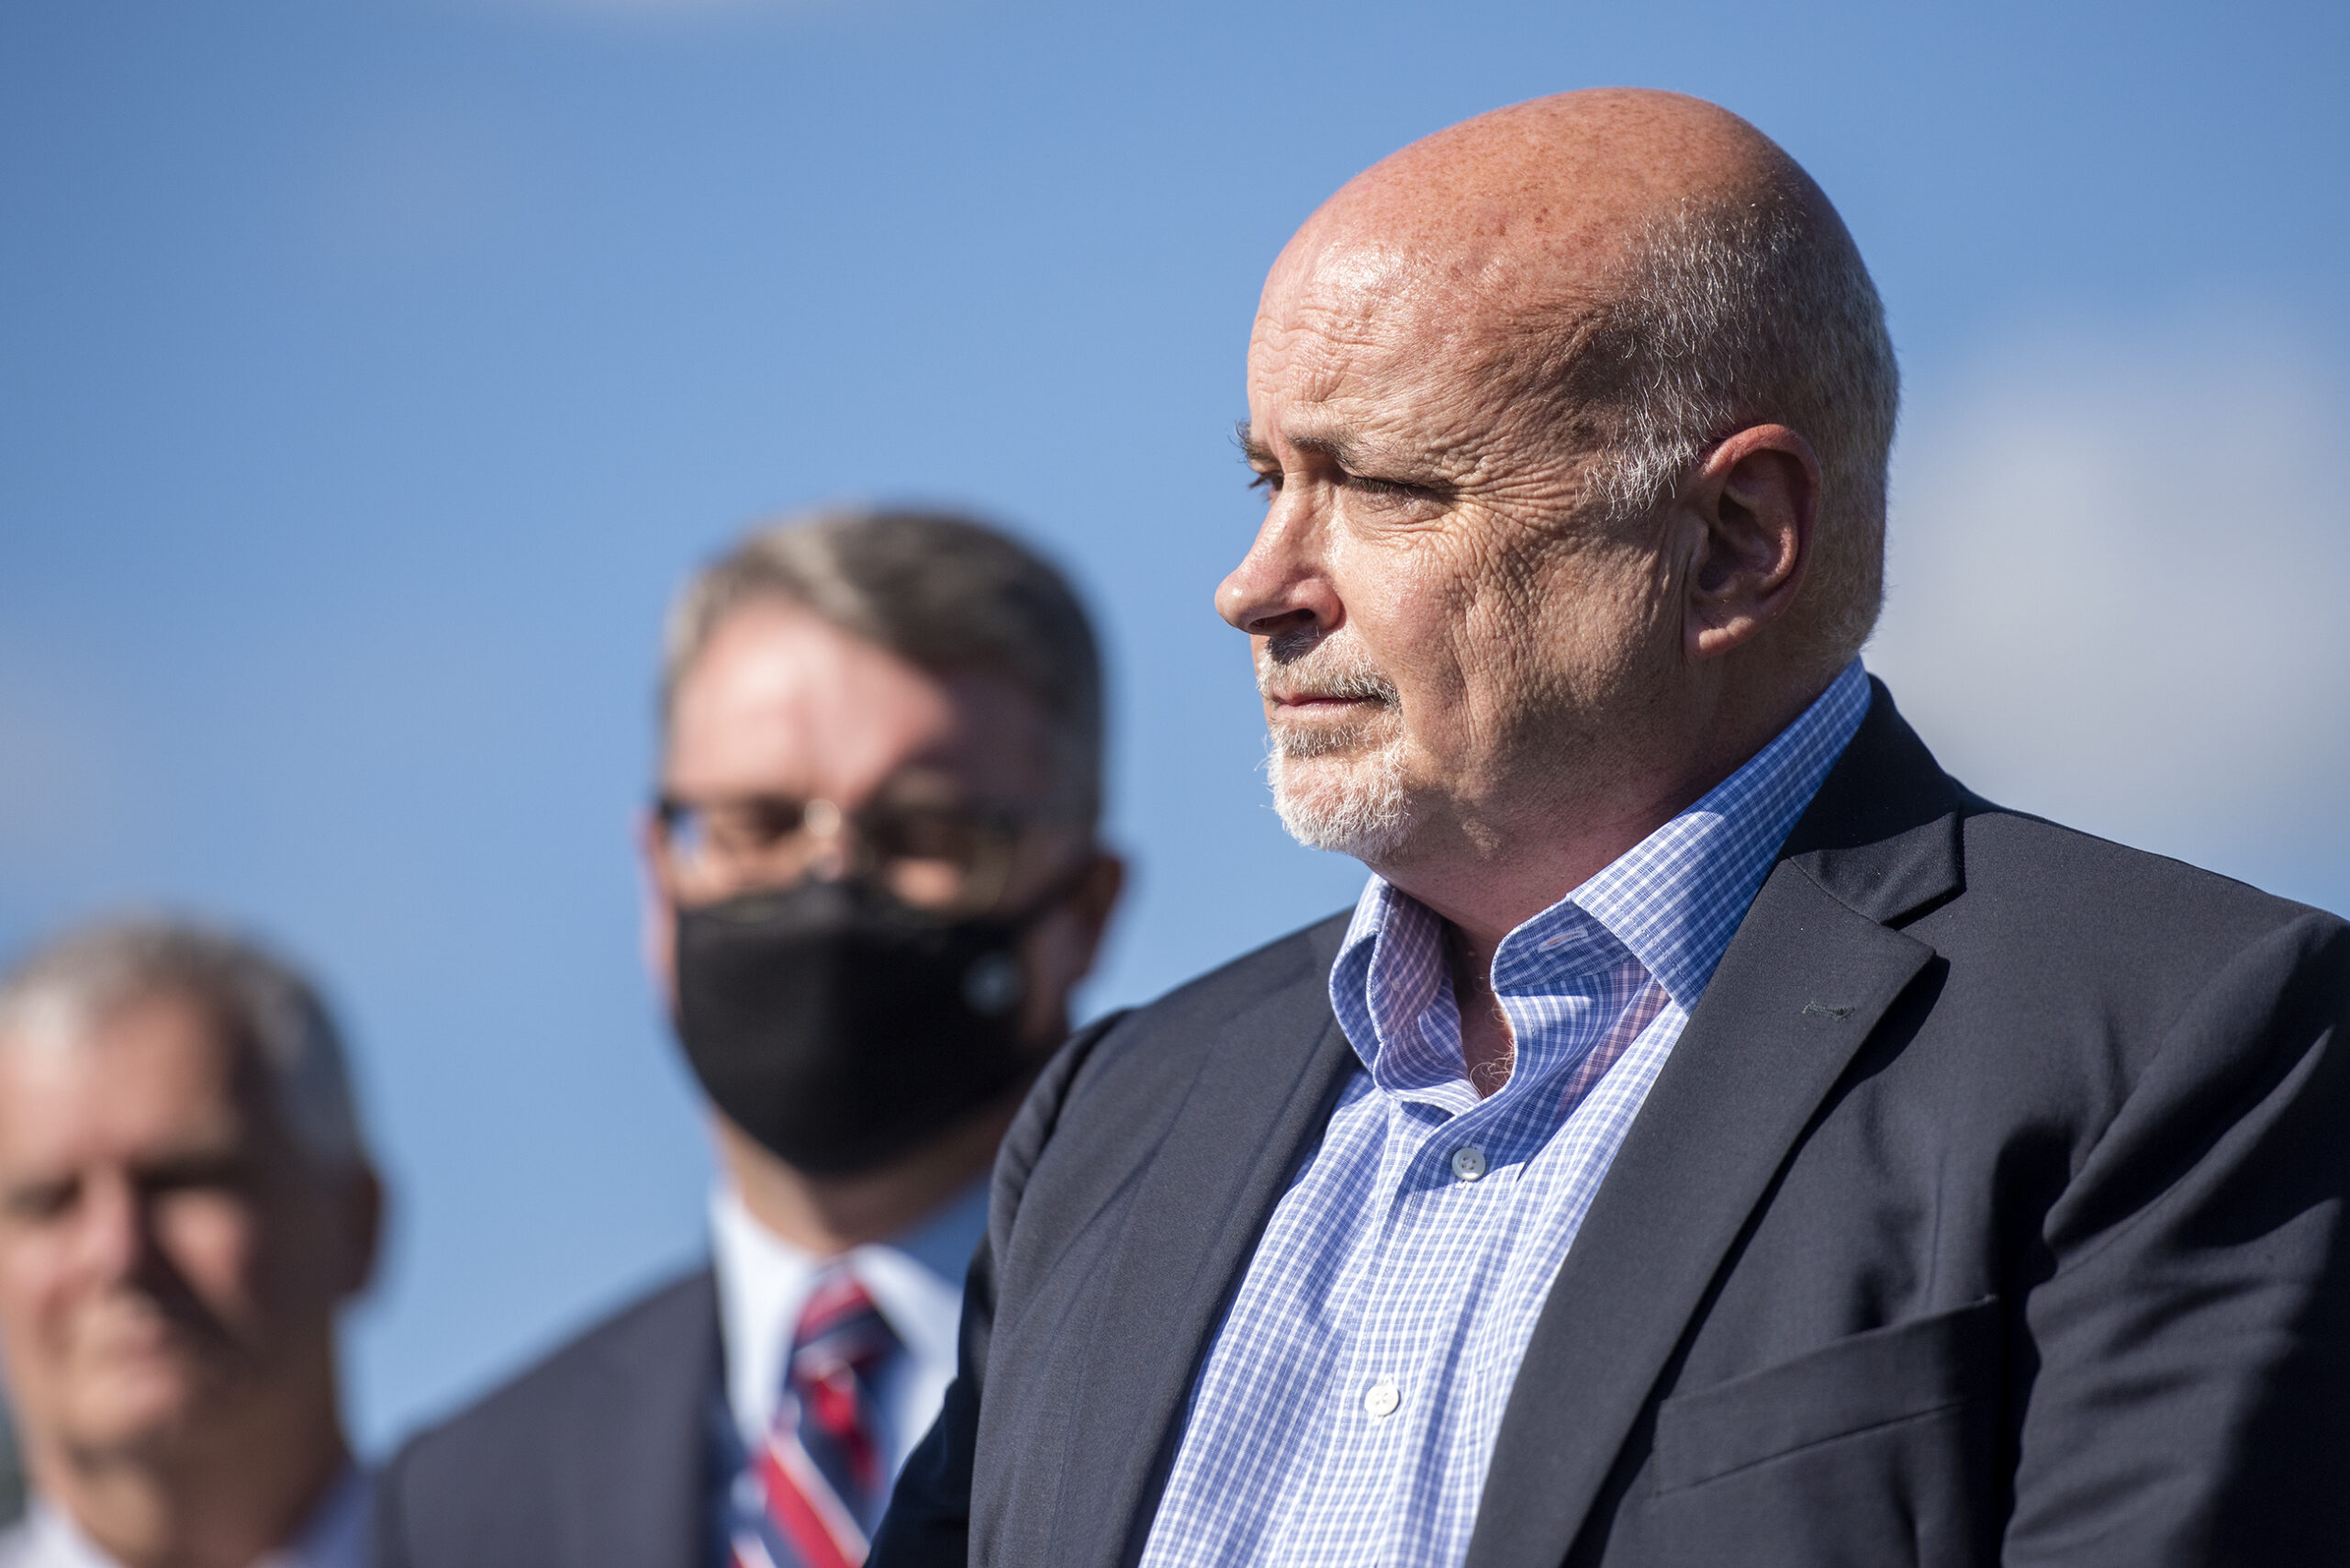 Rep. Pocan says Republicans spread misinformation as Harris launches presidential campaign